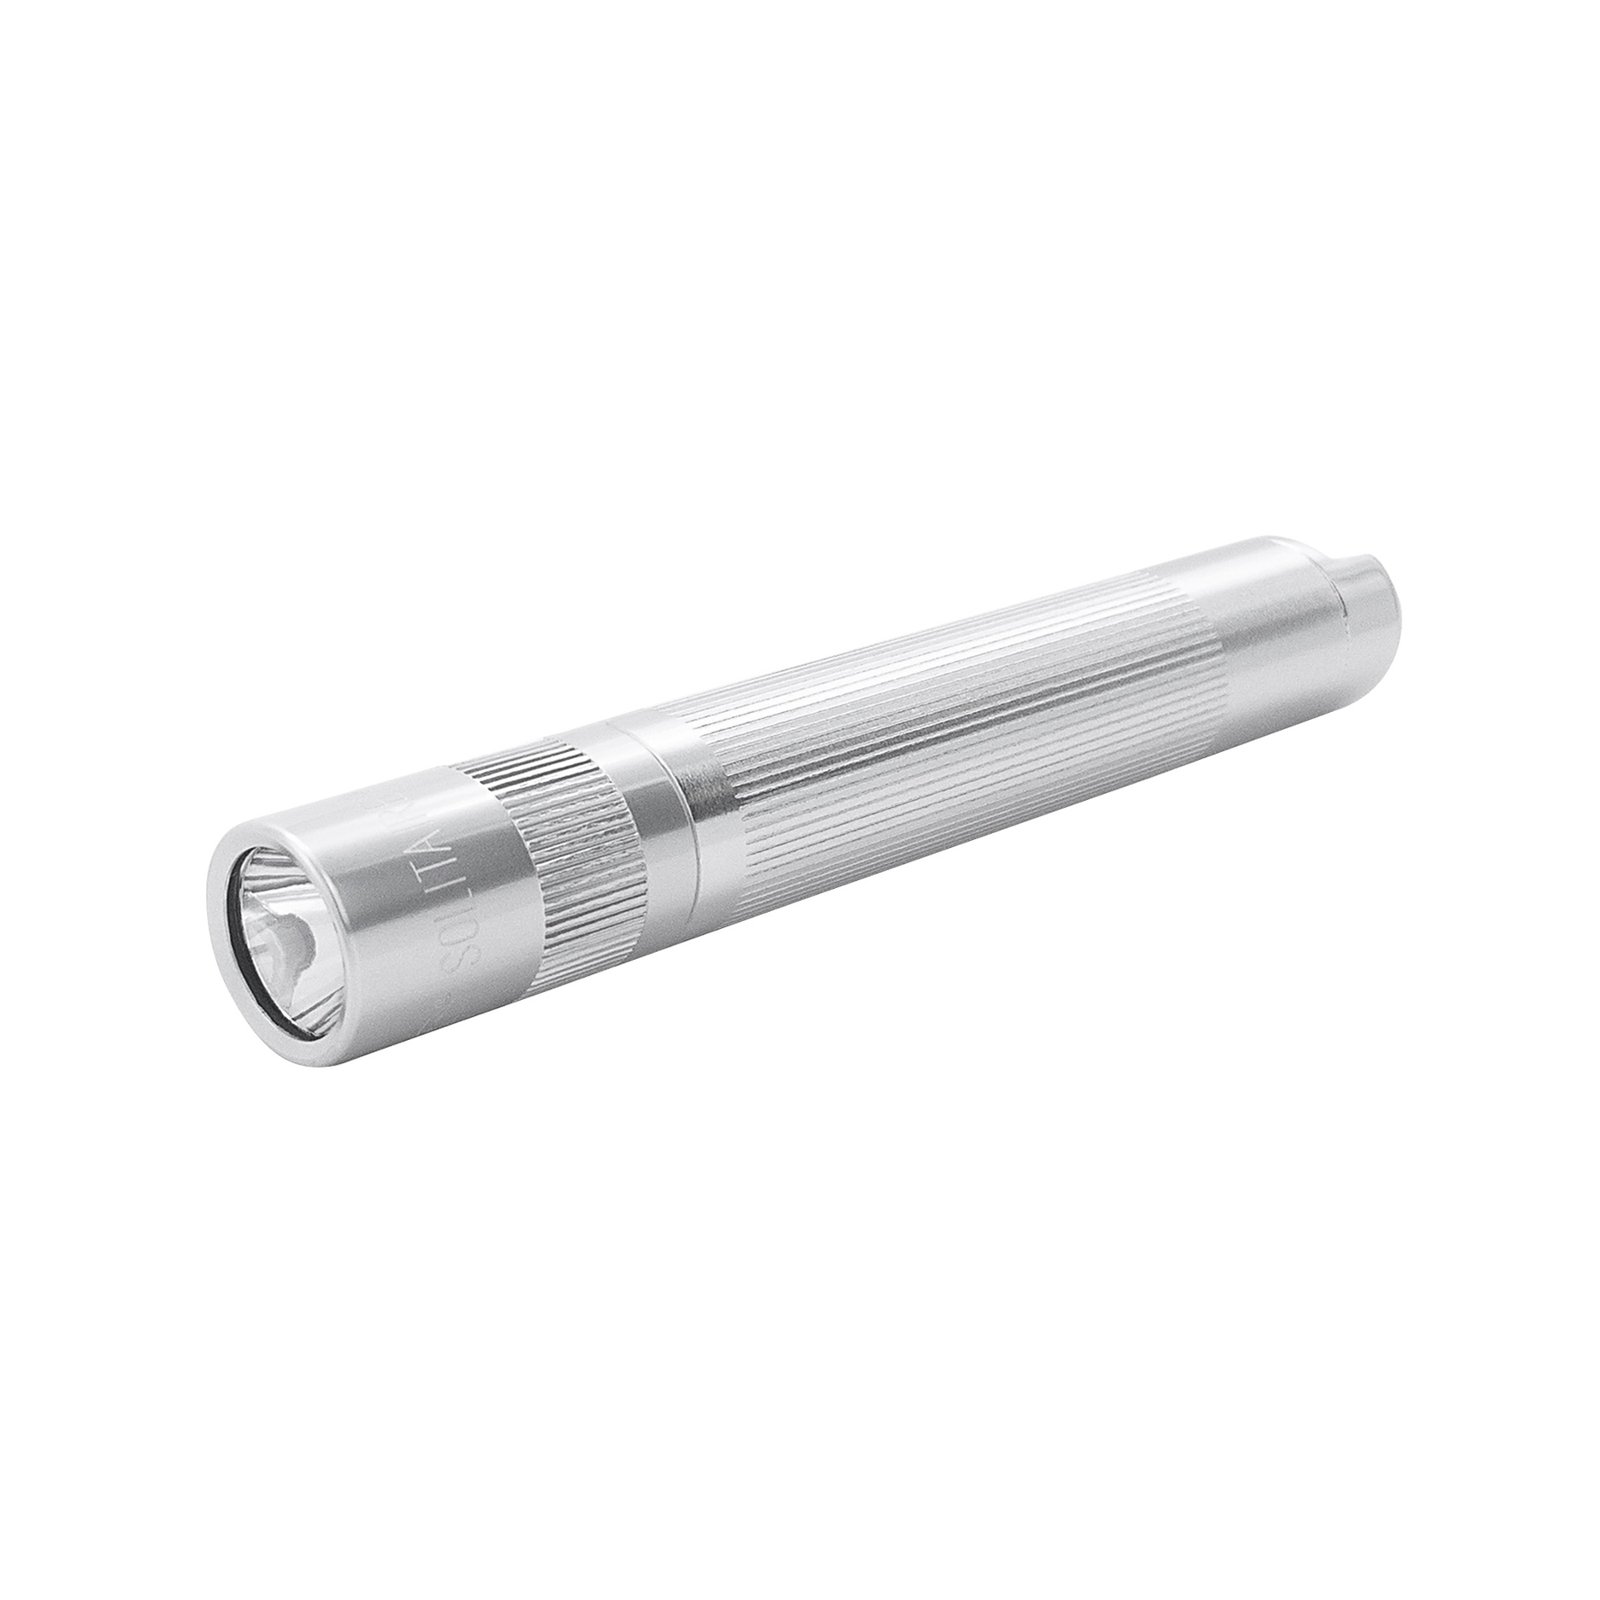 Maglite LED-ficklampa Solitaire, 1-cell AAA, låda, silver